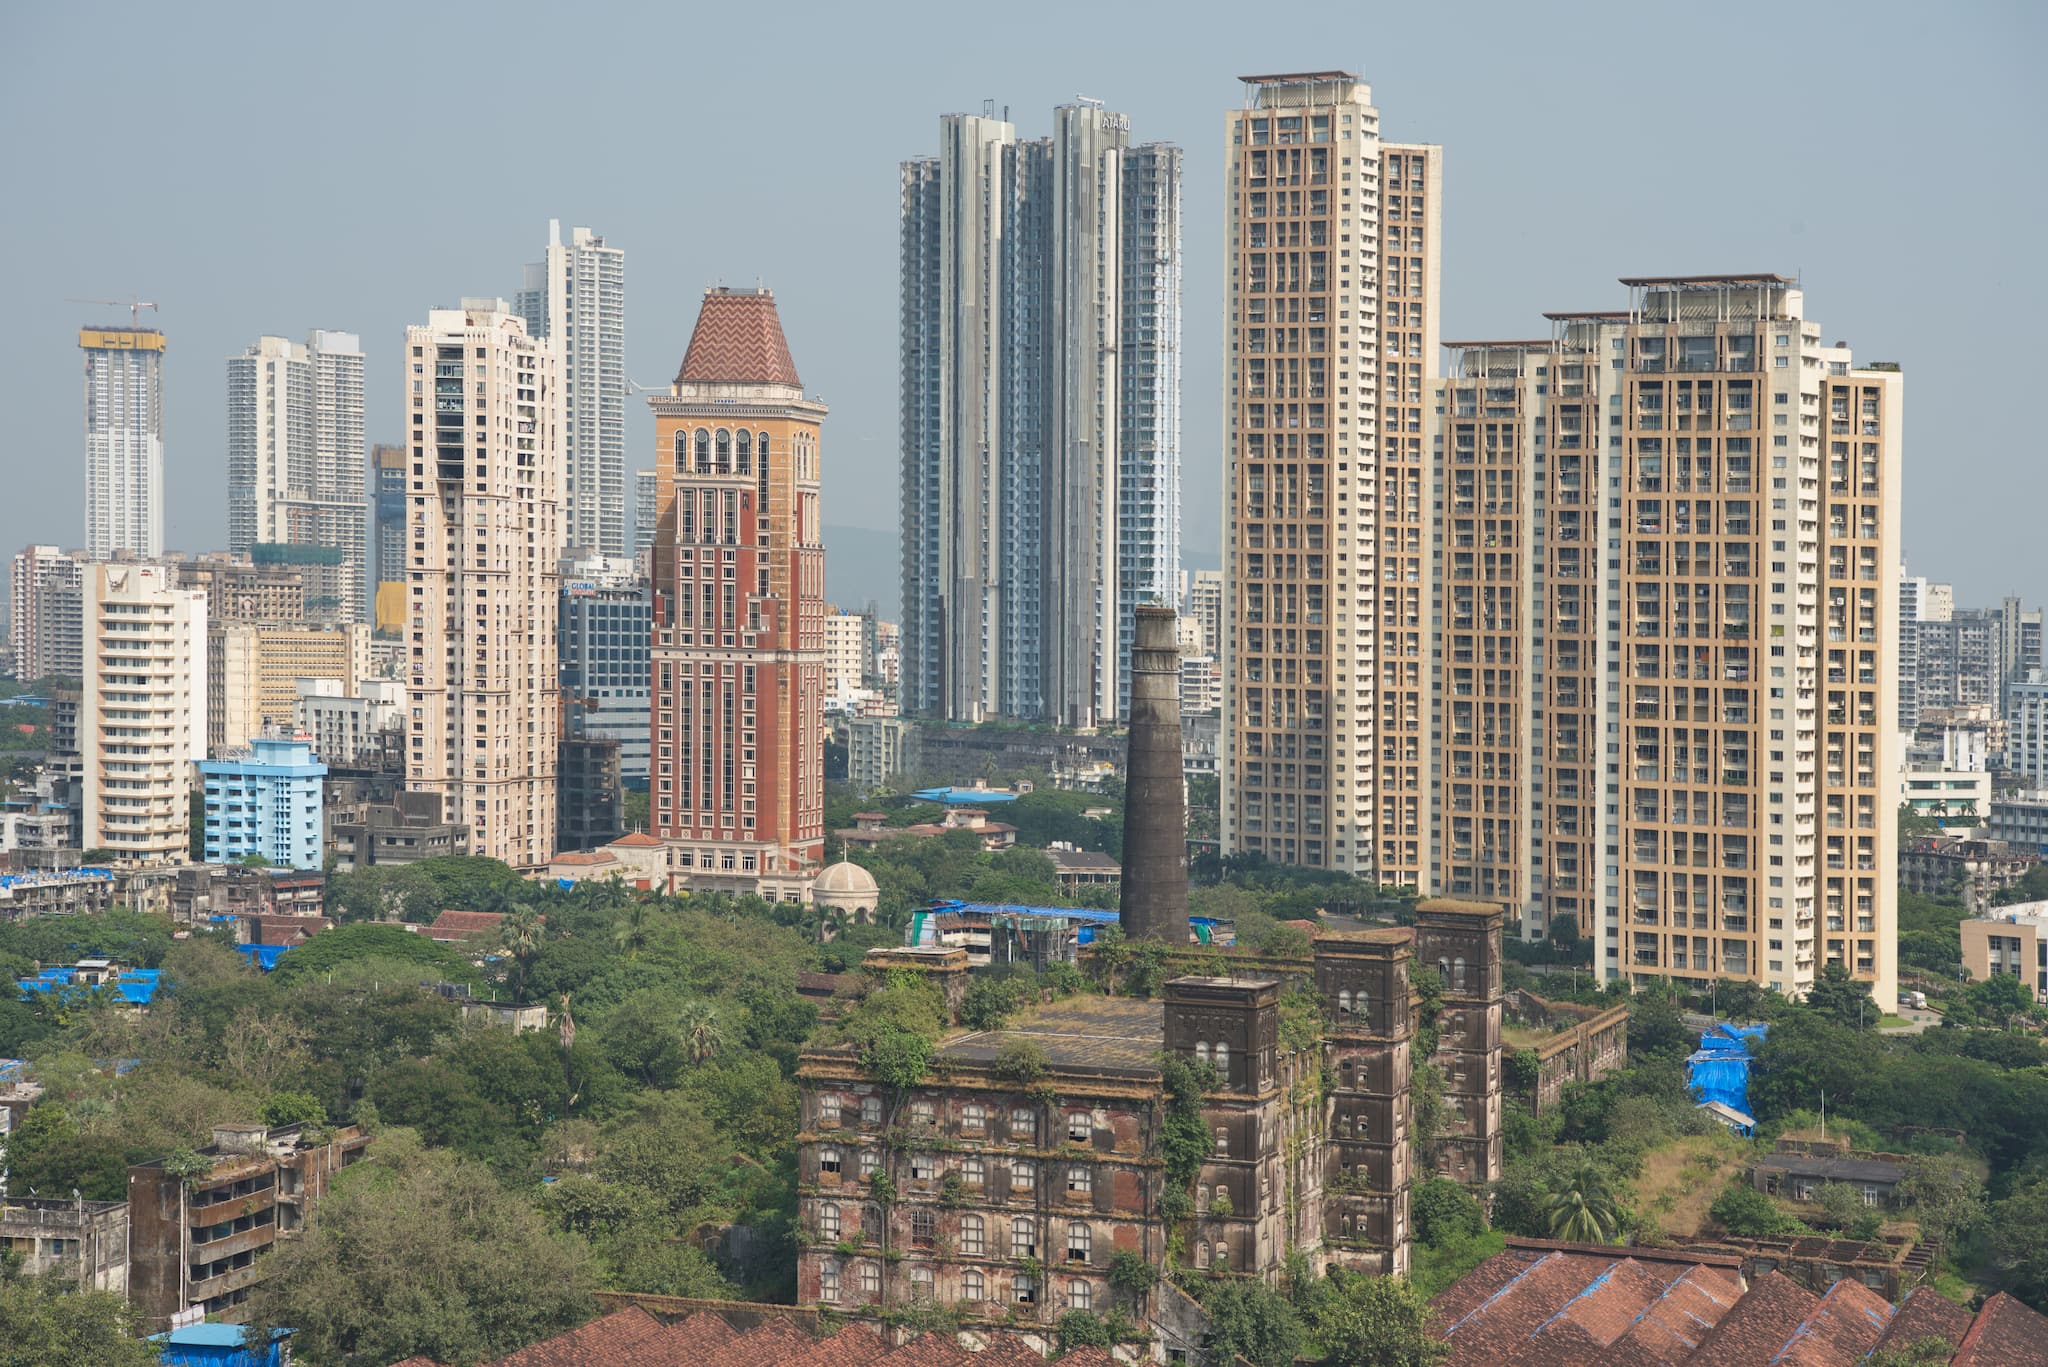  Runwal Group acquires land parcel for Rs 471 crore in Thane